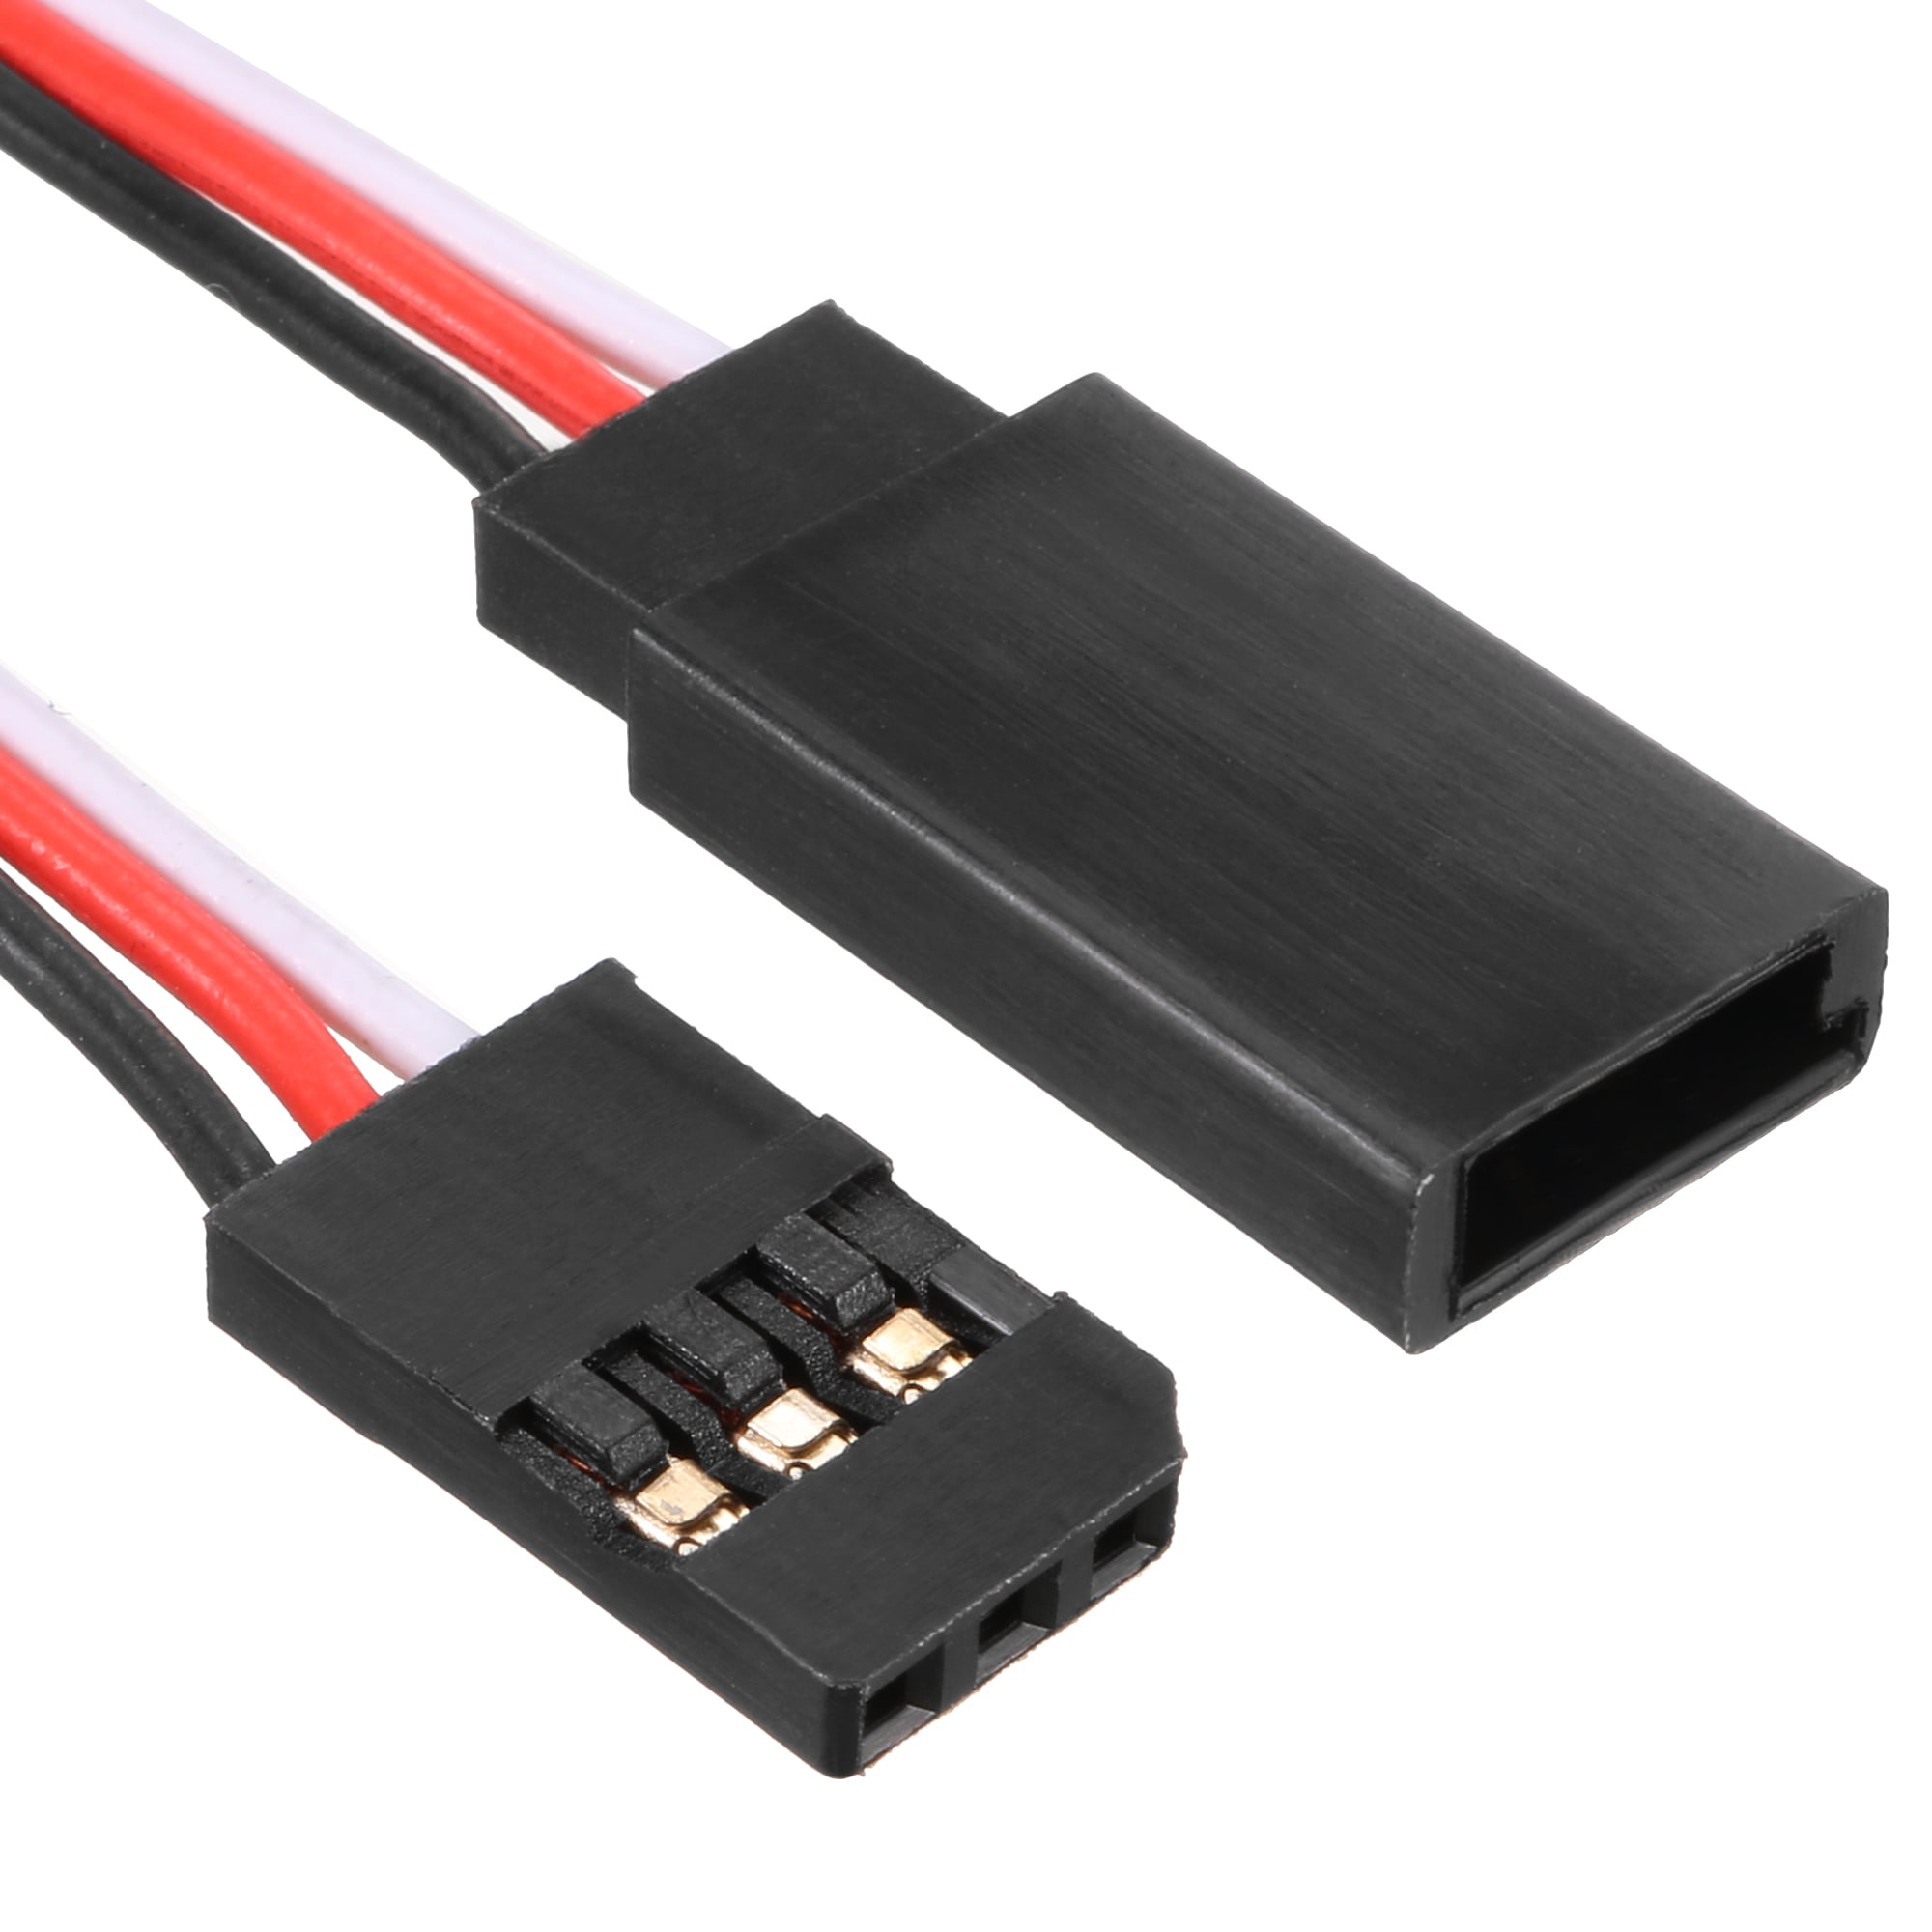 Details about   5X Servo Extension Lead Wire Cable For RC Futaba JR Male to Female Connector